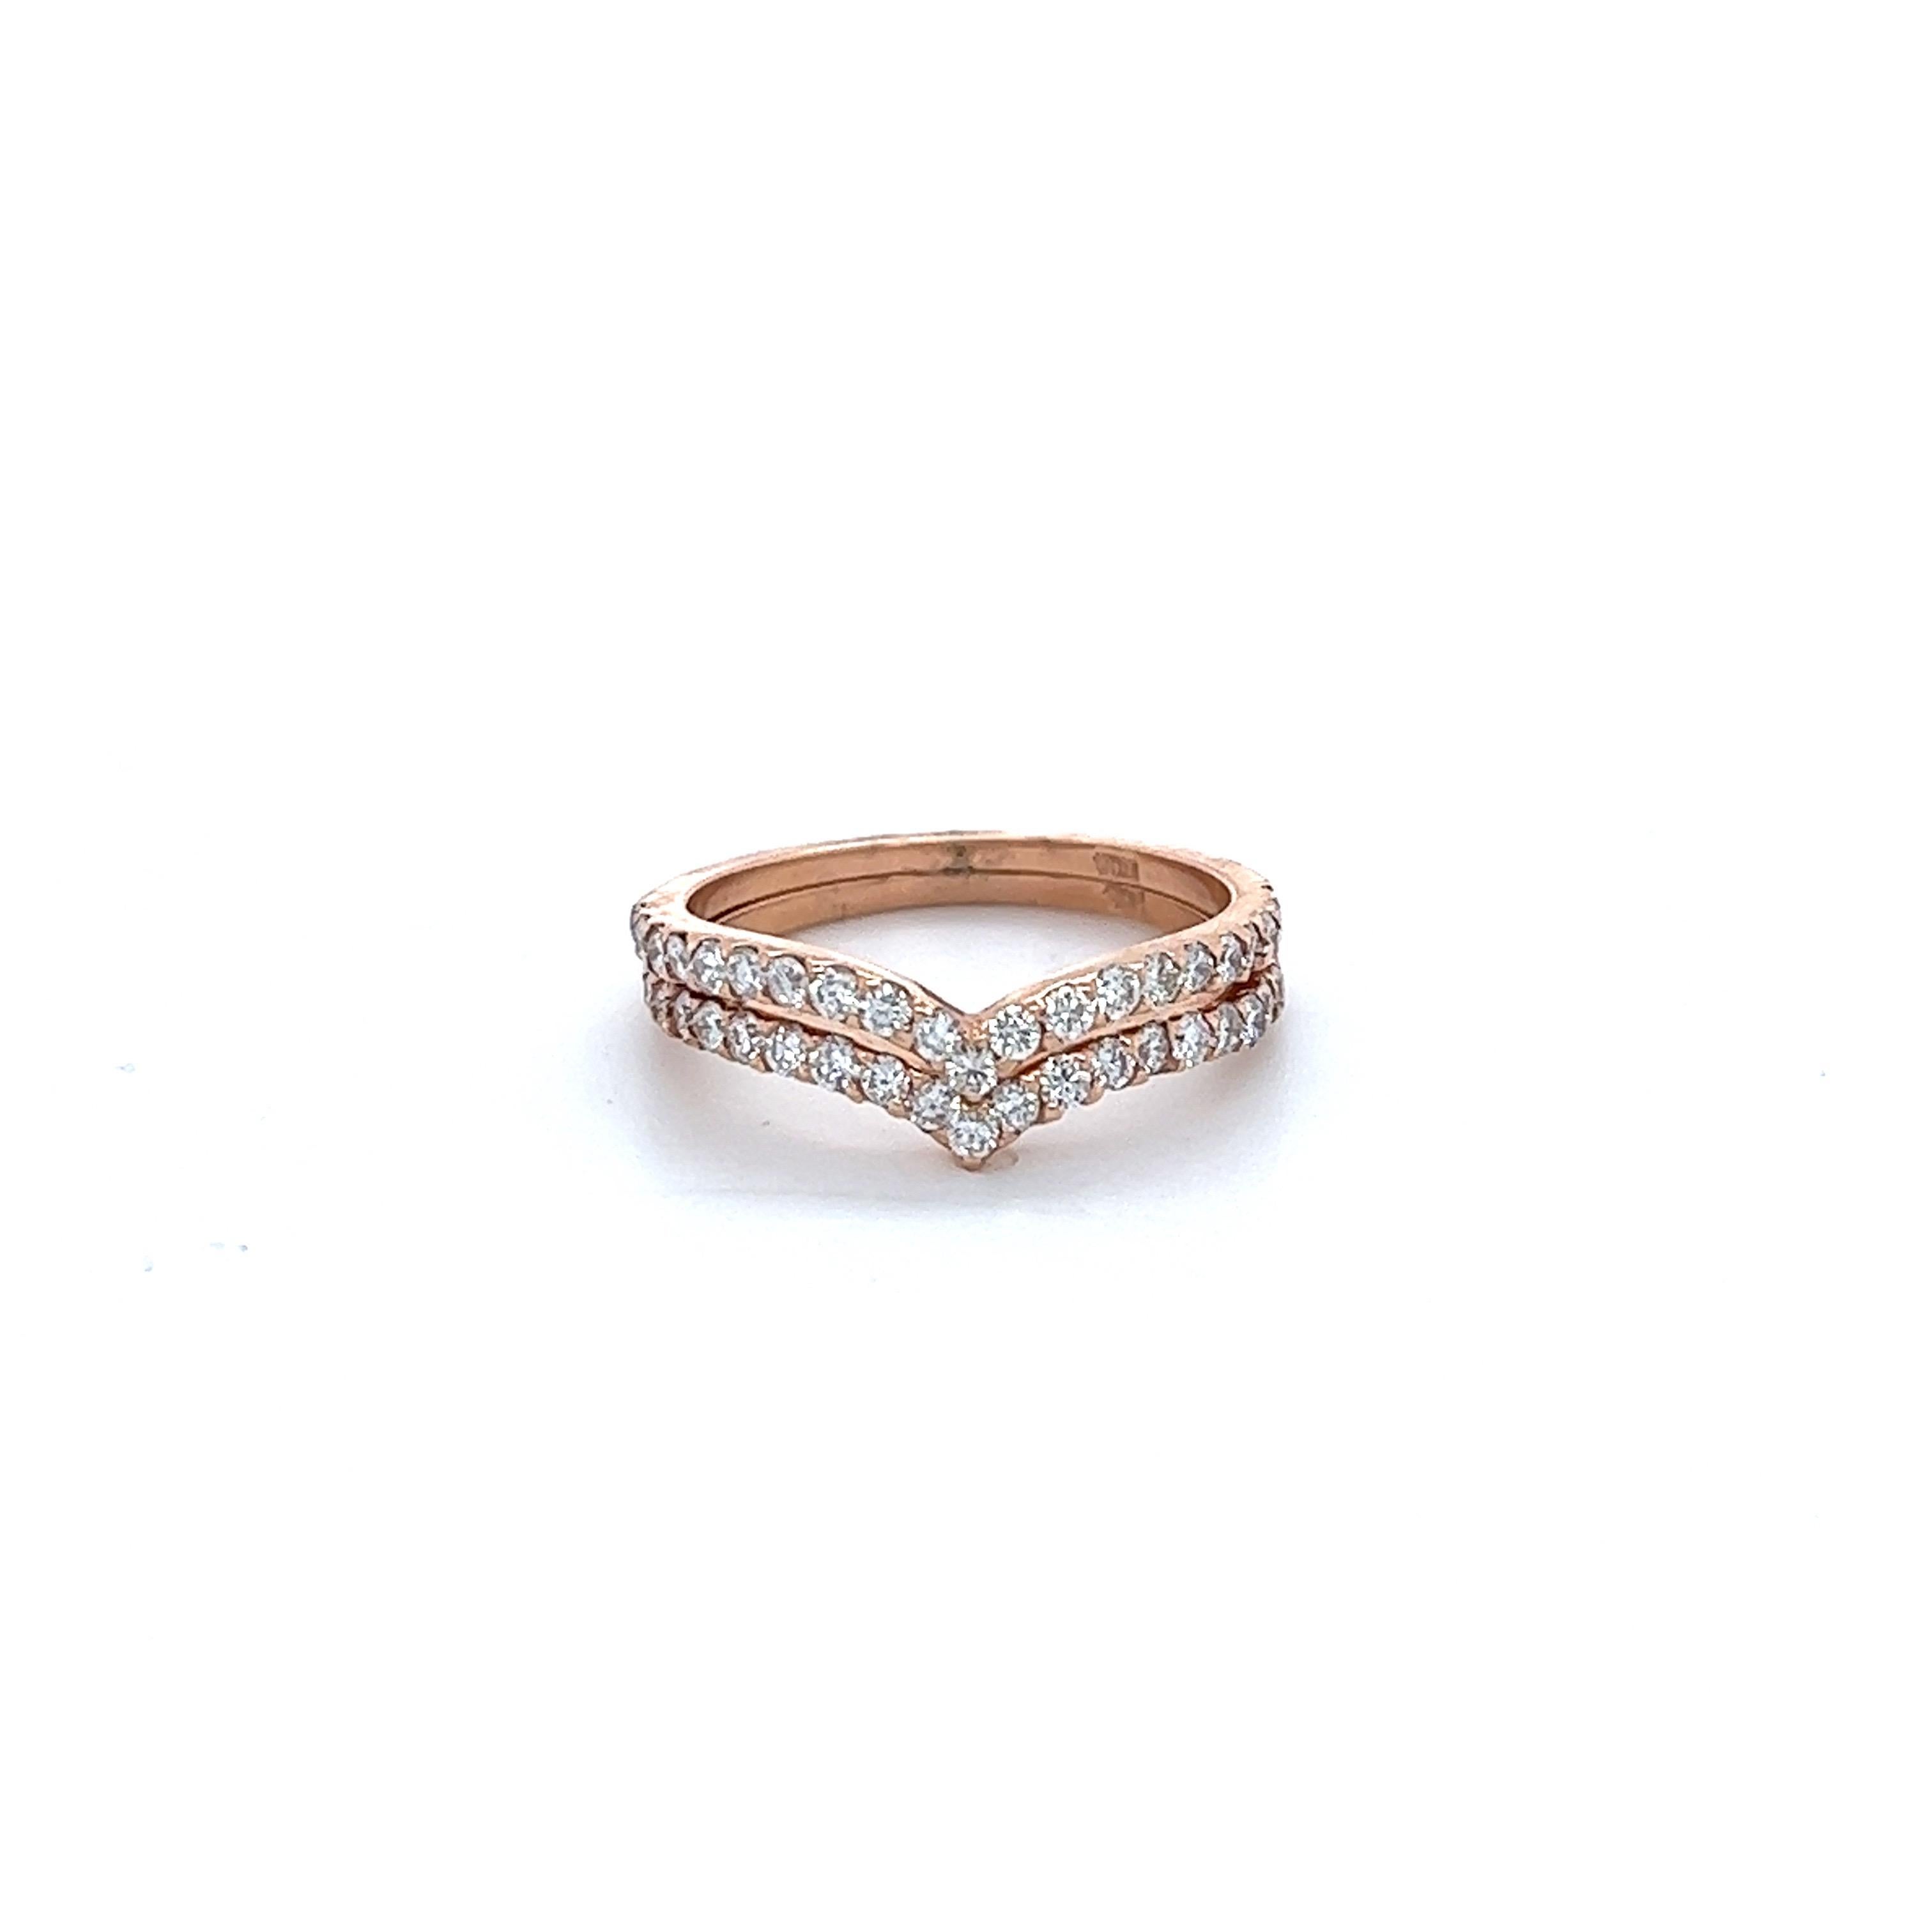 Beautiful bands that can be worn together or separately. 
Both rings have 42 Round Cut Diamonds that weigh 0.79 Carats. The clarity and color of the diamonds are VS-H.

Crafted in 14 Karat Rose Gold and has a weight of approximately 3.6 grams 

The